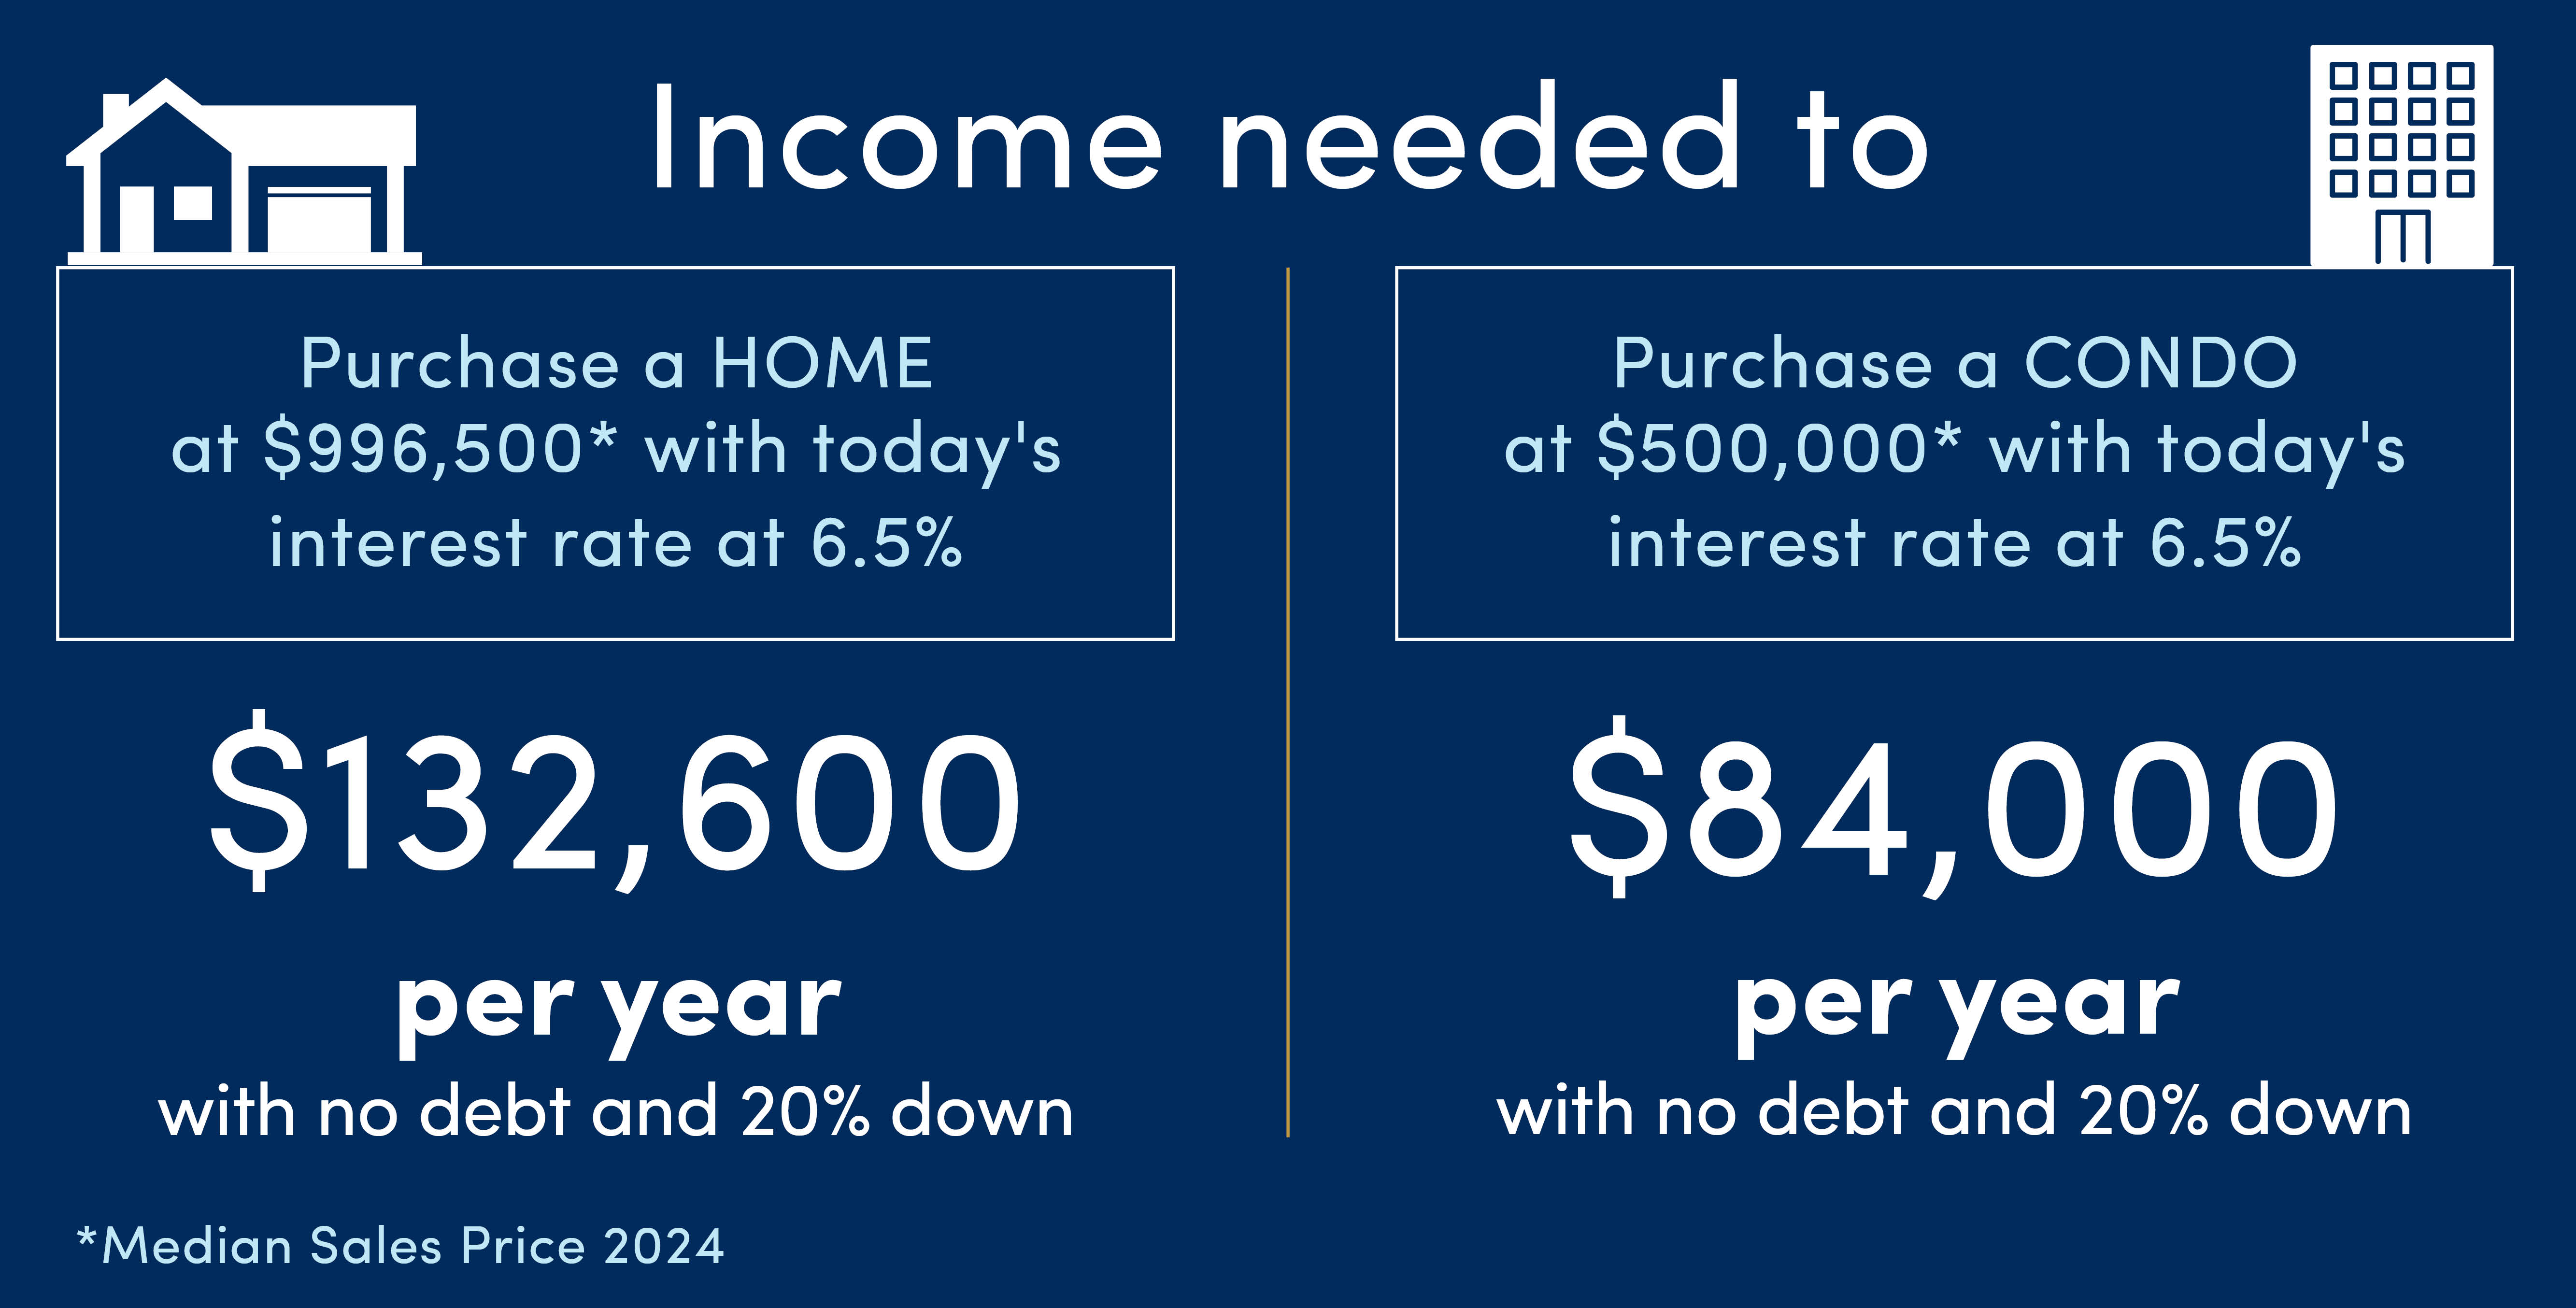 Income needed to purchase a house under certain conditions